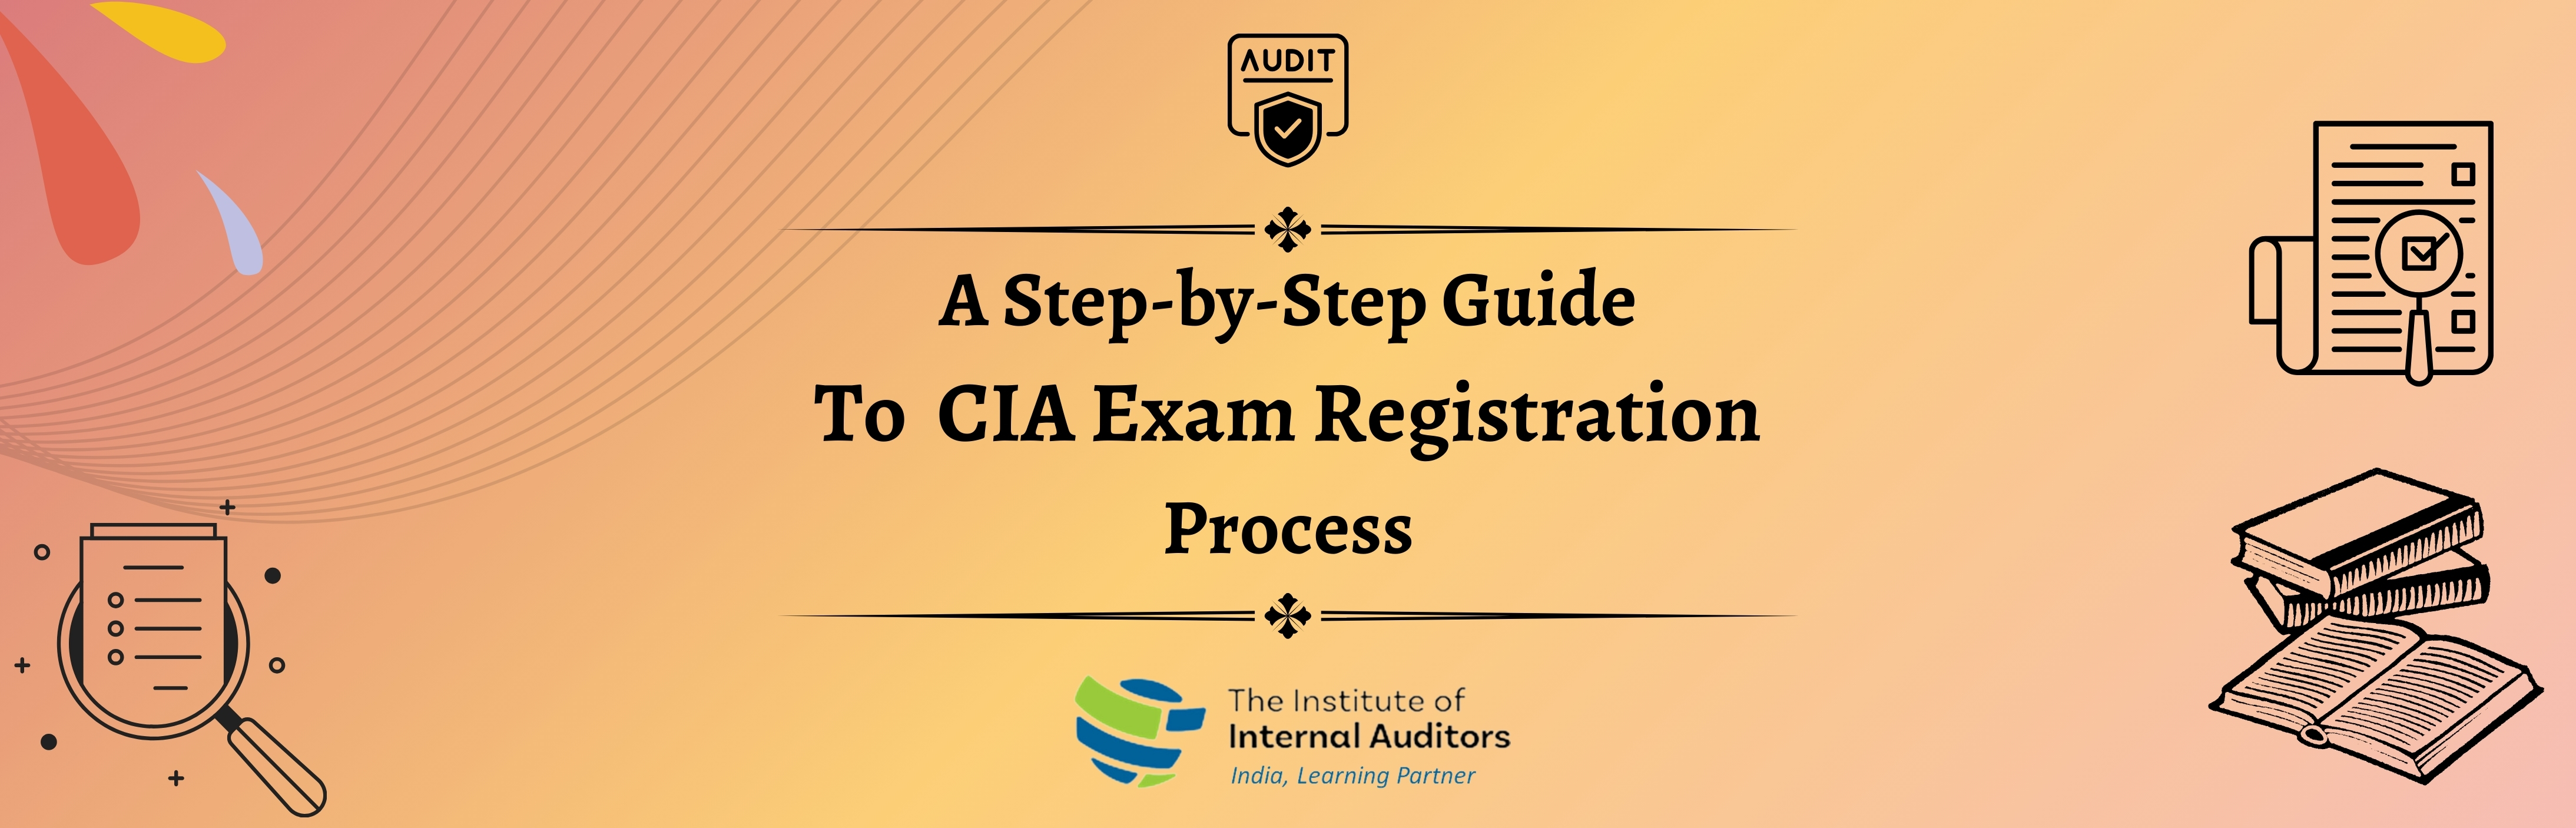 A Step by Step Guide To The CIA Exam Registration Process